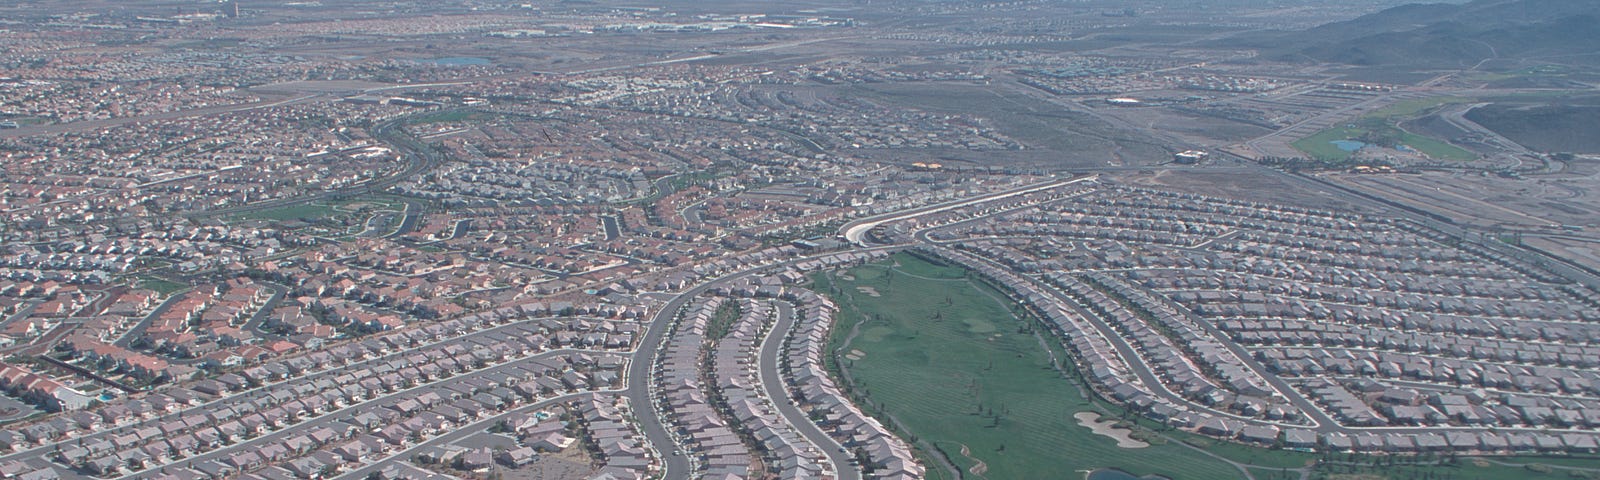 Aerieal view of sprawling suburbs. Near identical houses over and again for miles.